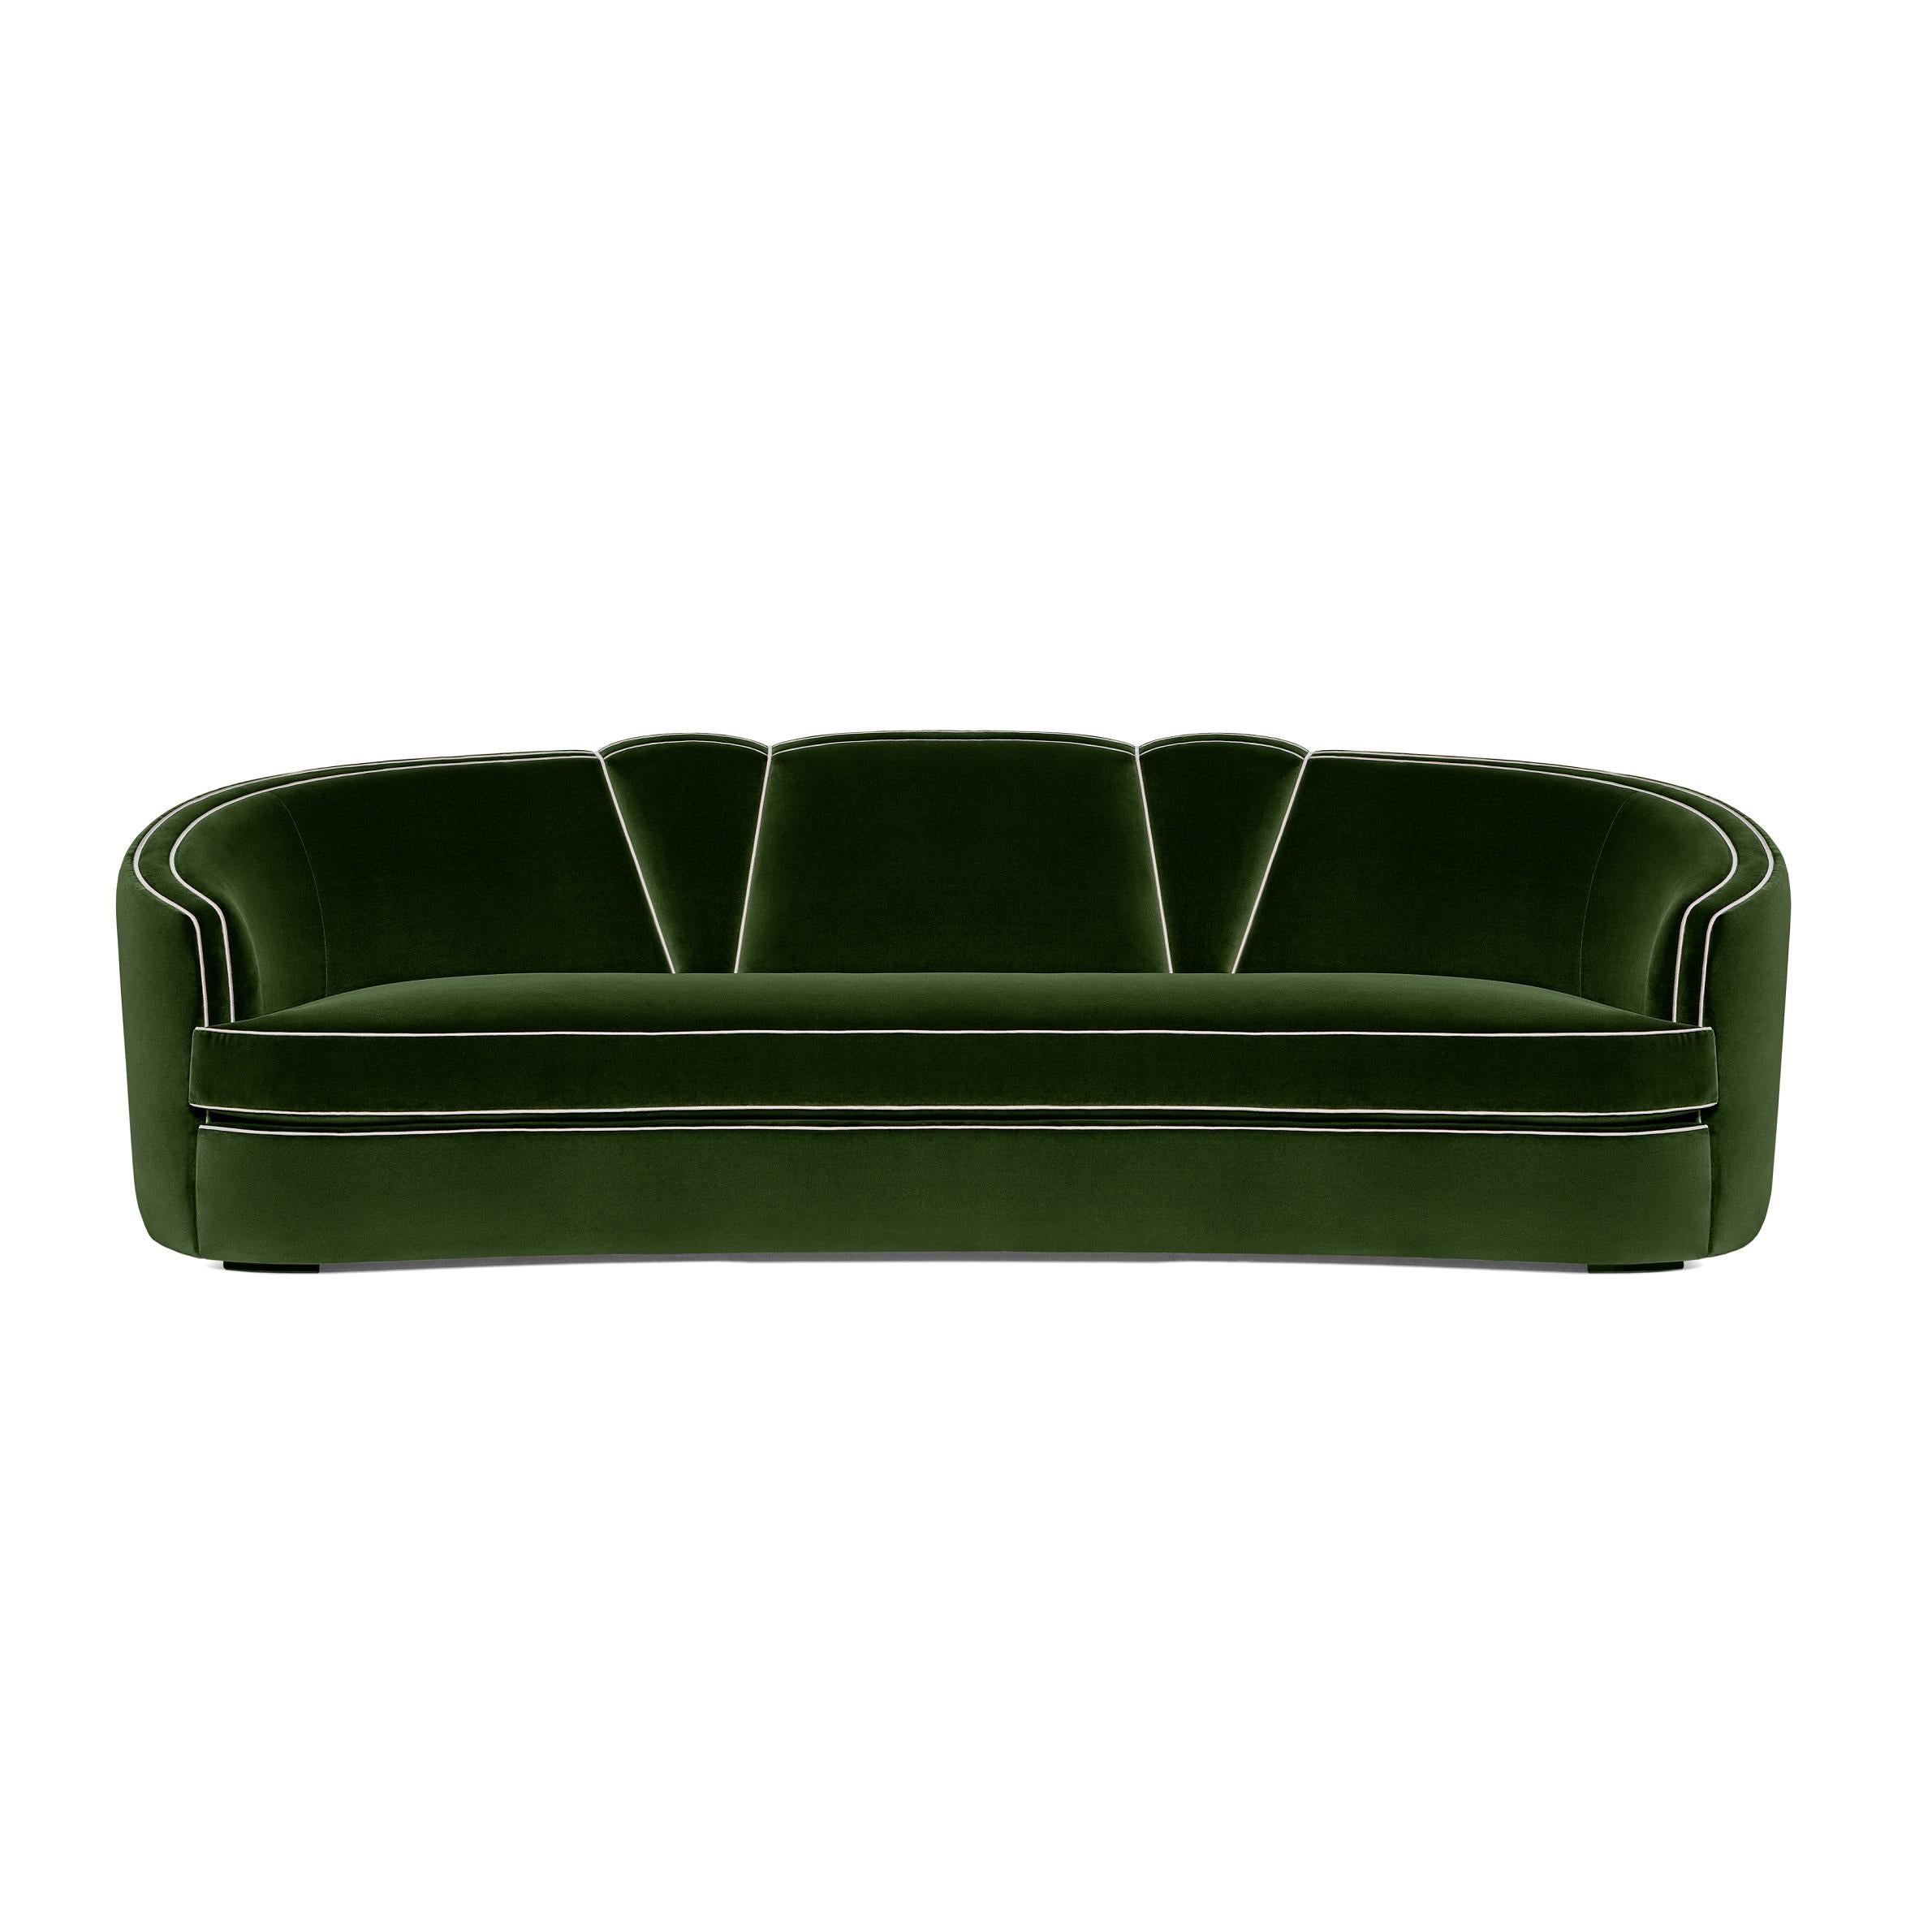 This sofa features a wonderfully elegant fan-shaped motif, with its accentuated curvy lines with decadent and lavish finish. The feminine curves are ravishingly enhanced by the different colored toned pipping.
Upholstery: velvet 
Feet: Upholstered